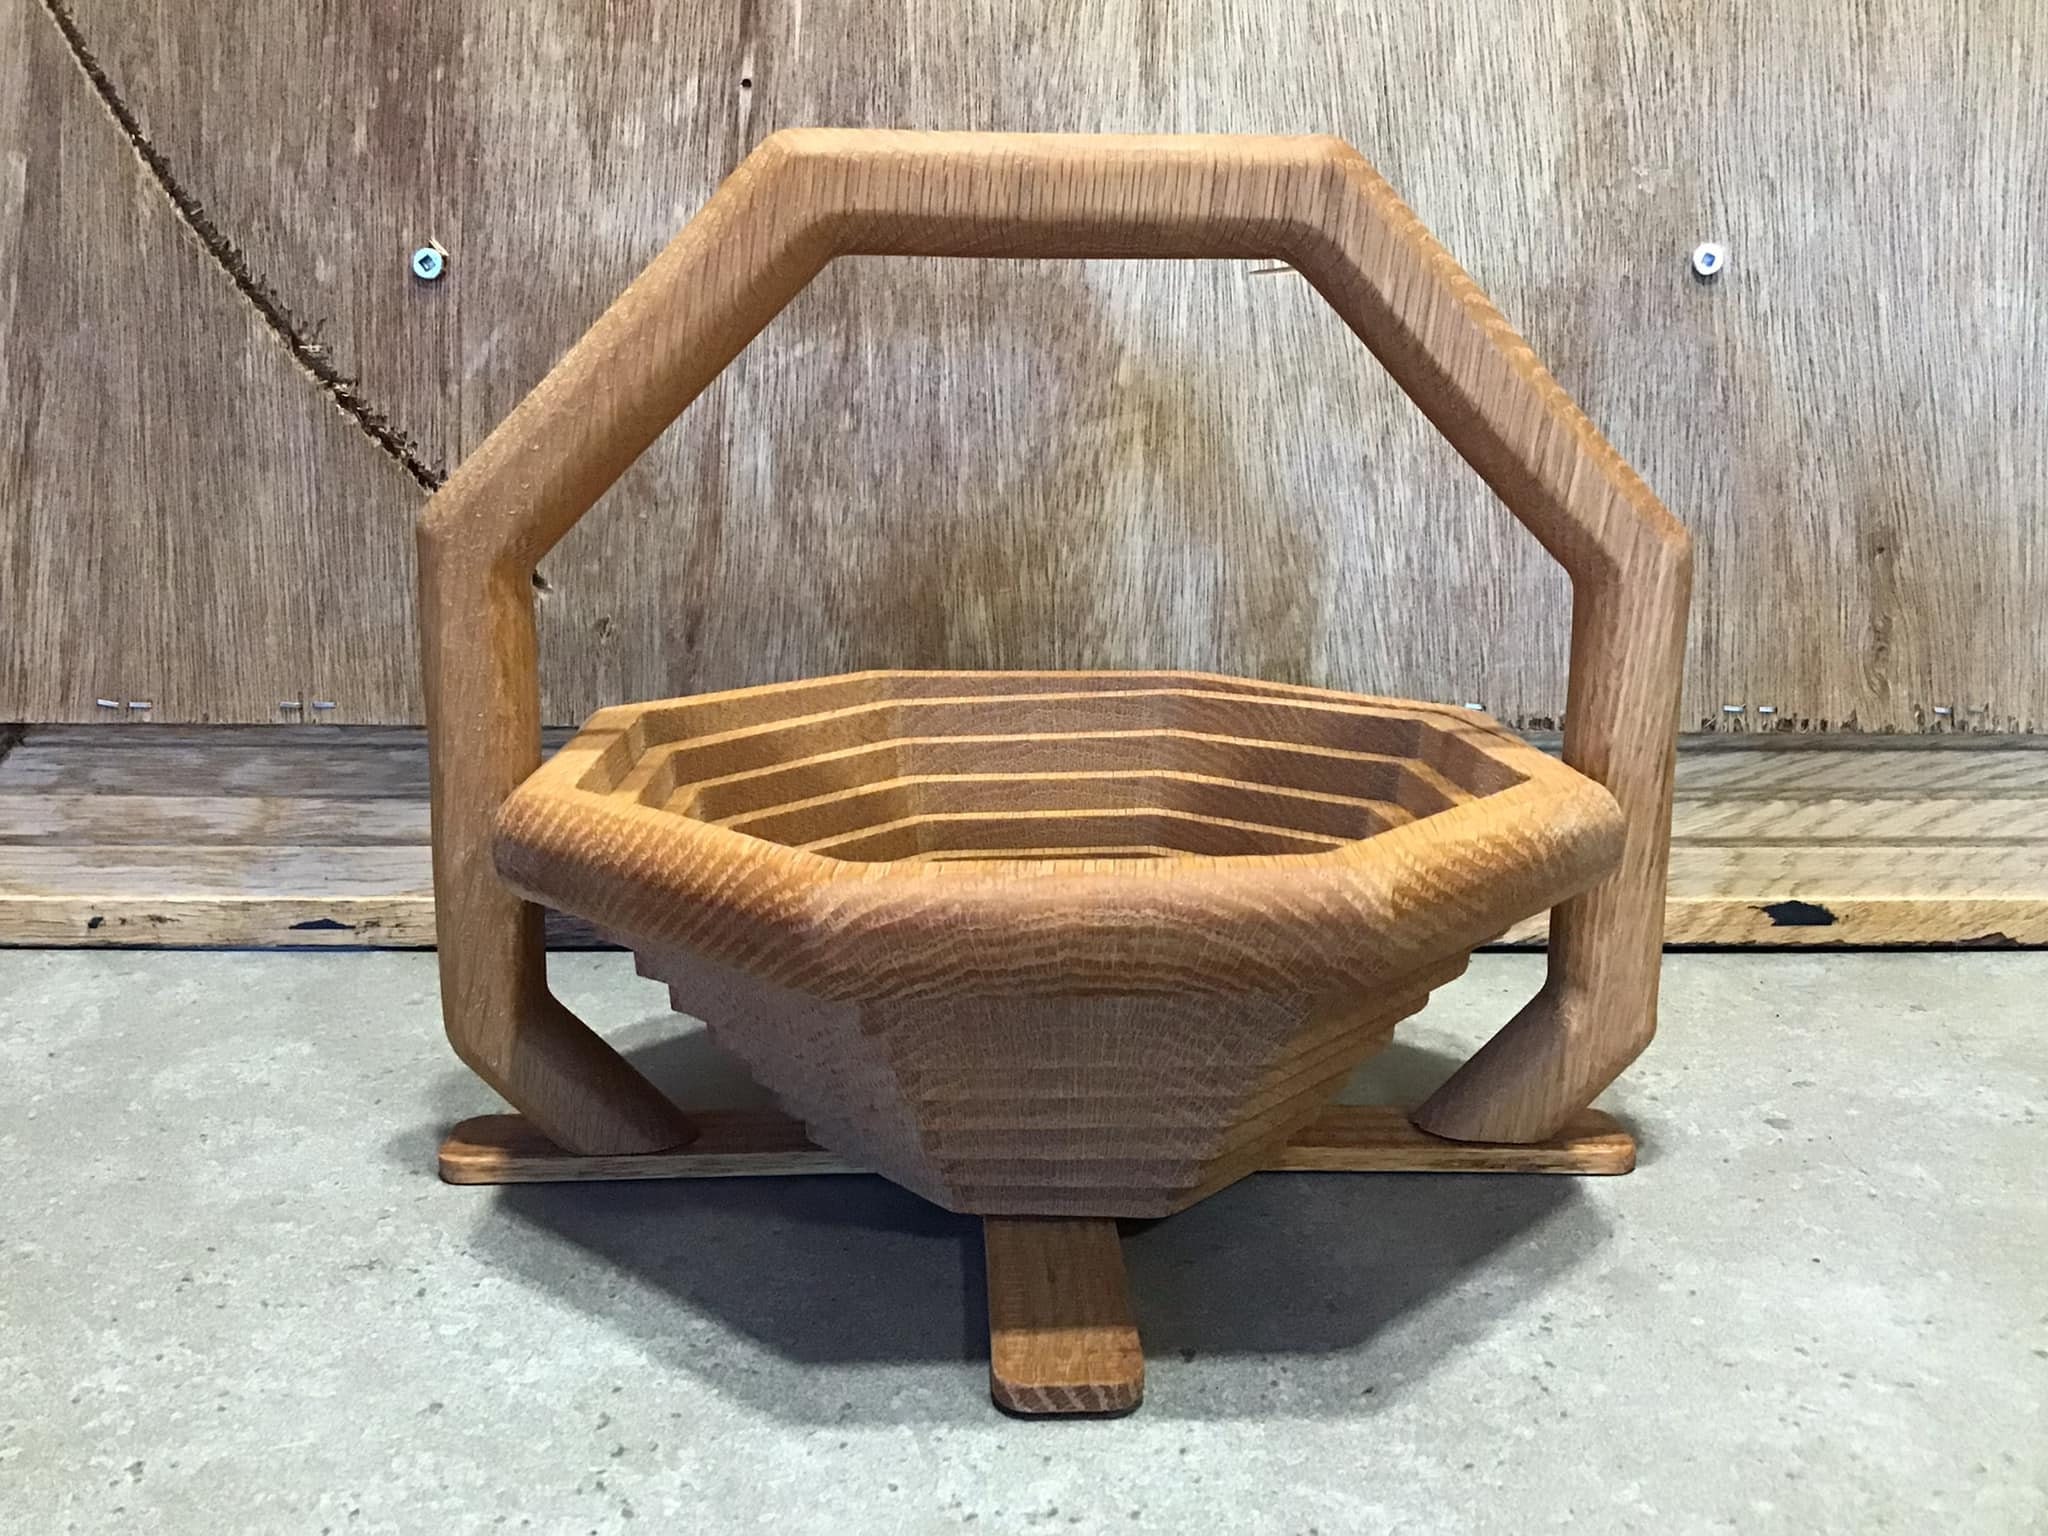 Collapsible Rustic Wood Basket 12 inch One Compartment